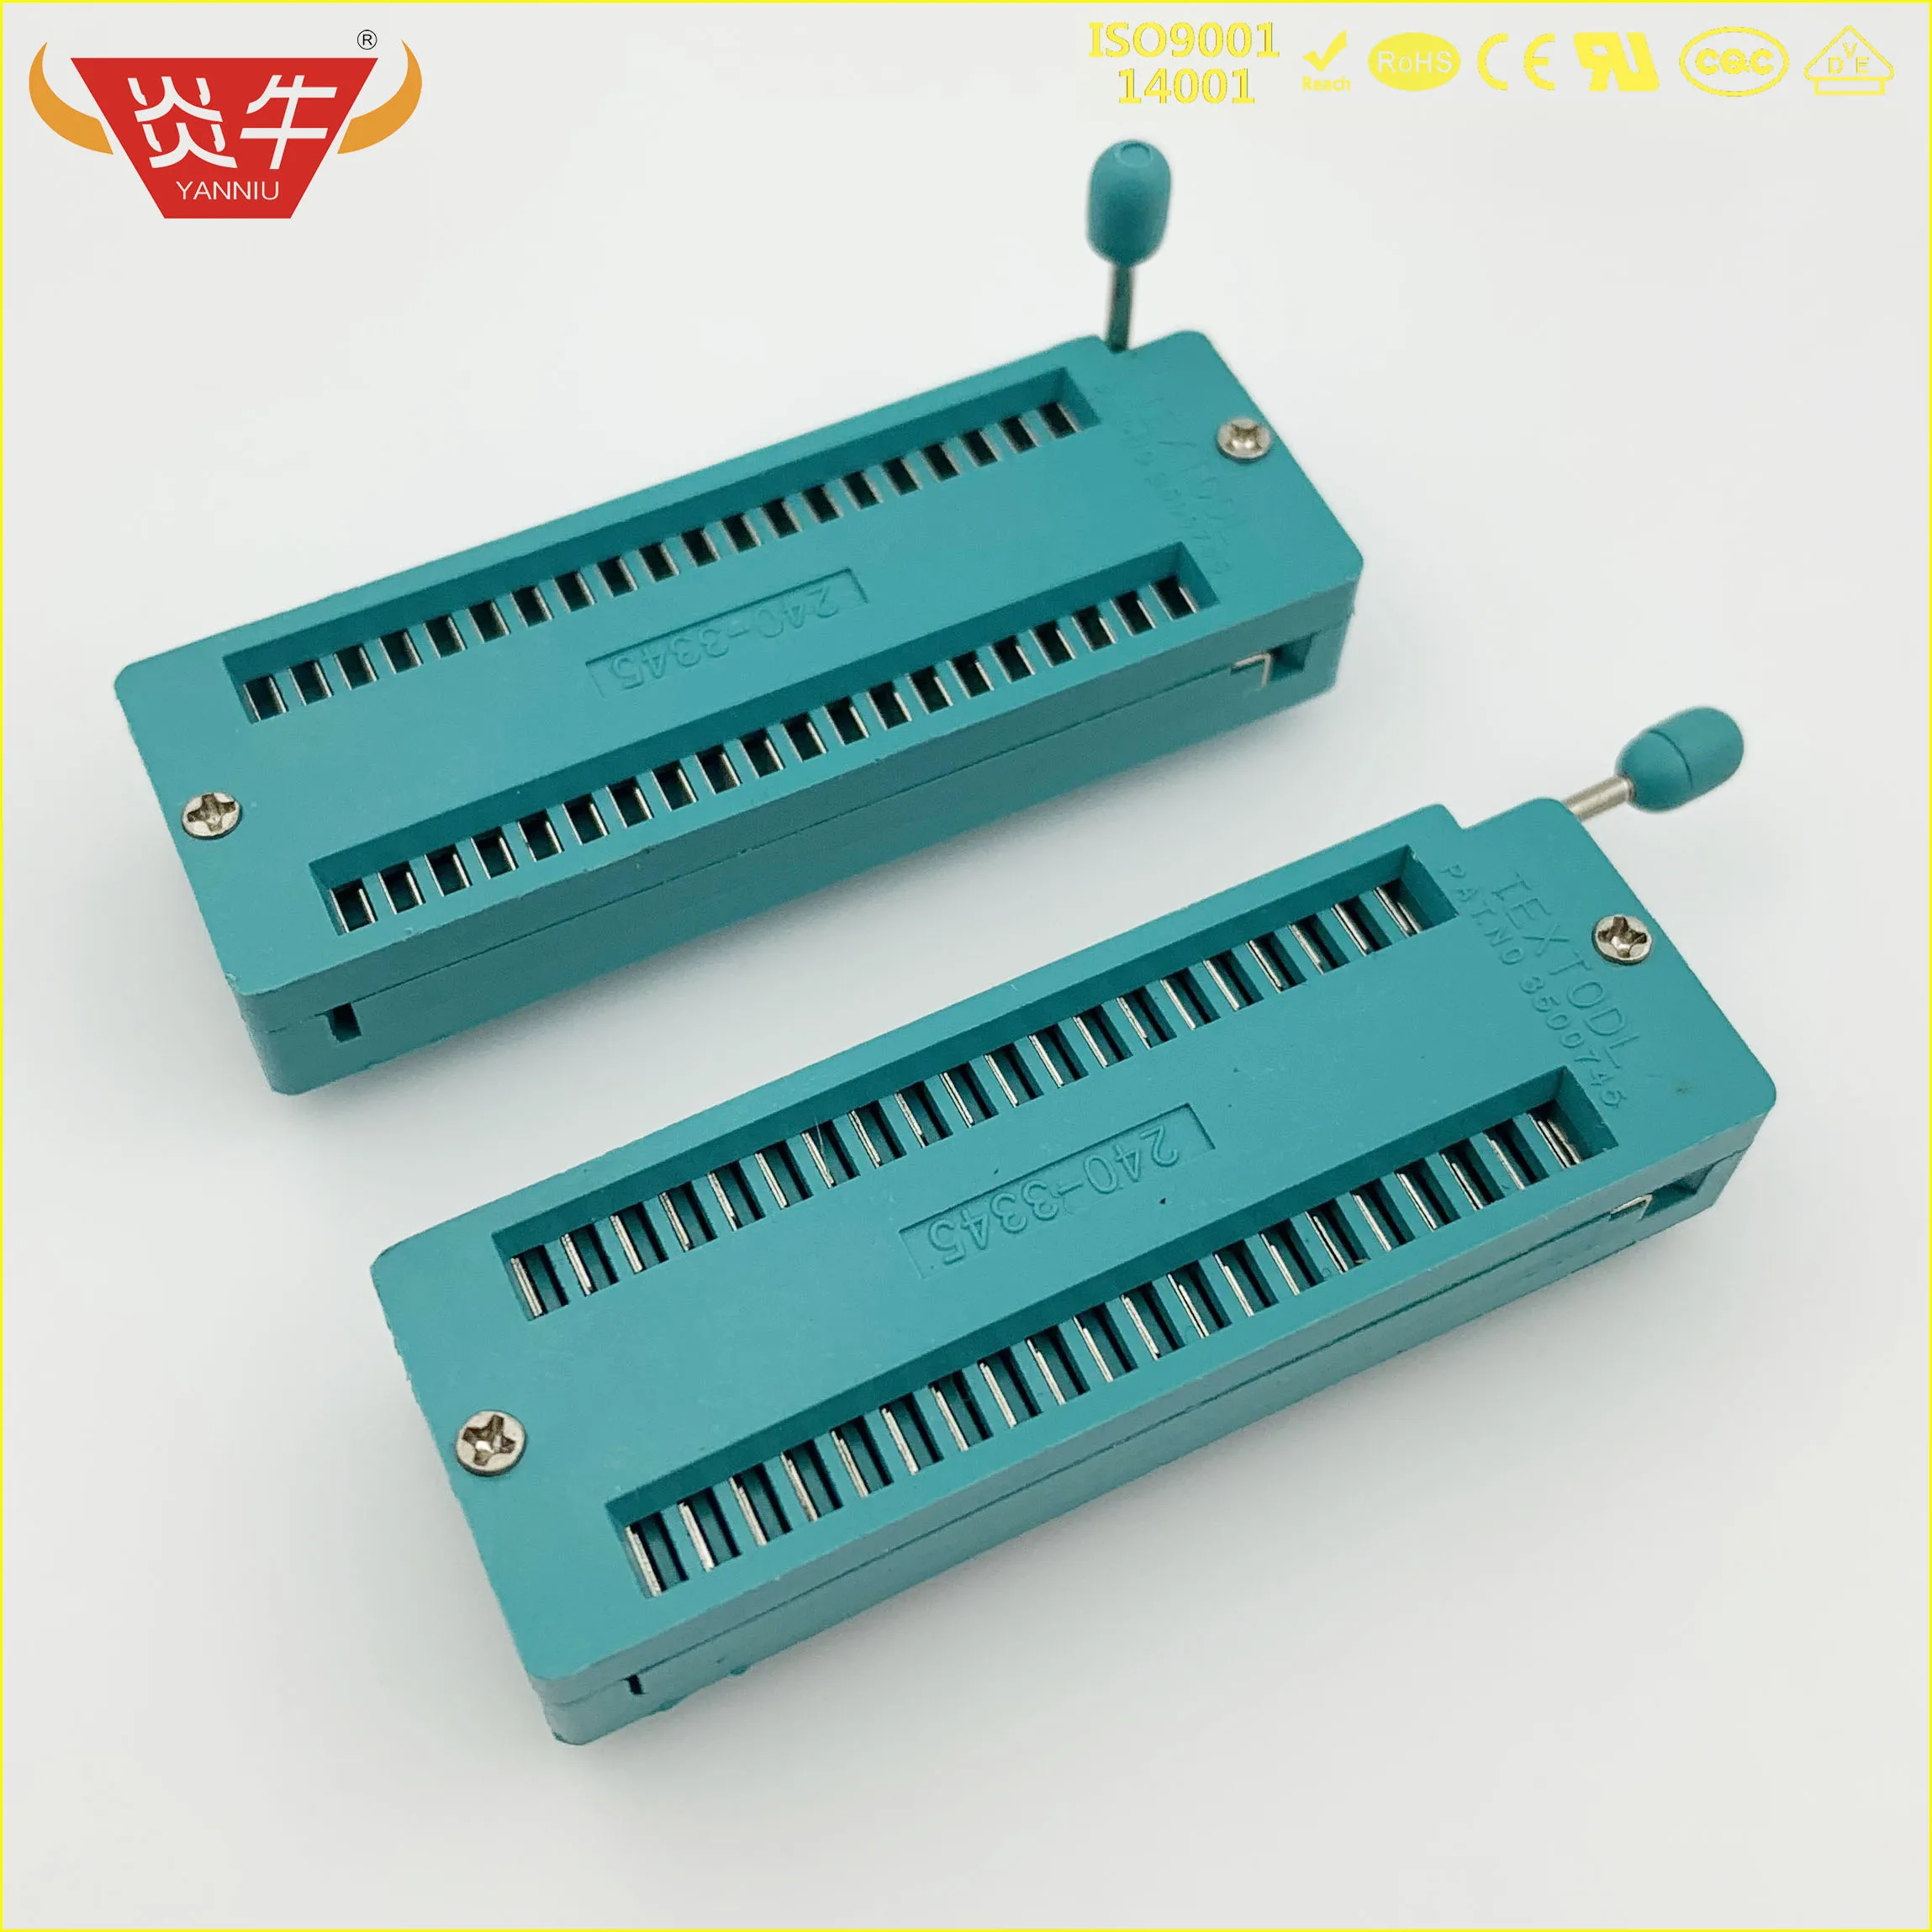 

10PCS GREEN wide body DIP40 ZIF ZIP IC SOCKET 40P DIP CHIP TEST Adaptor 40 PIN dip-40 40PIN 2.54MM PITCH CONNECTOR FOR PCB